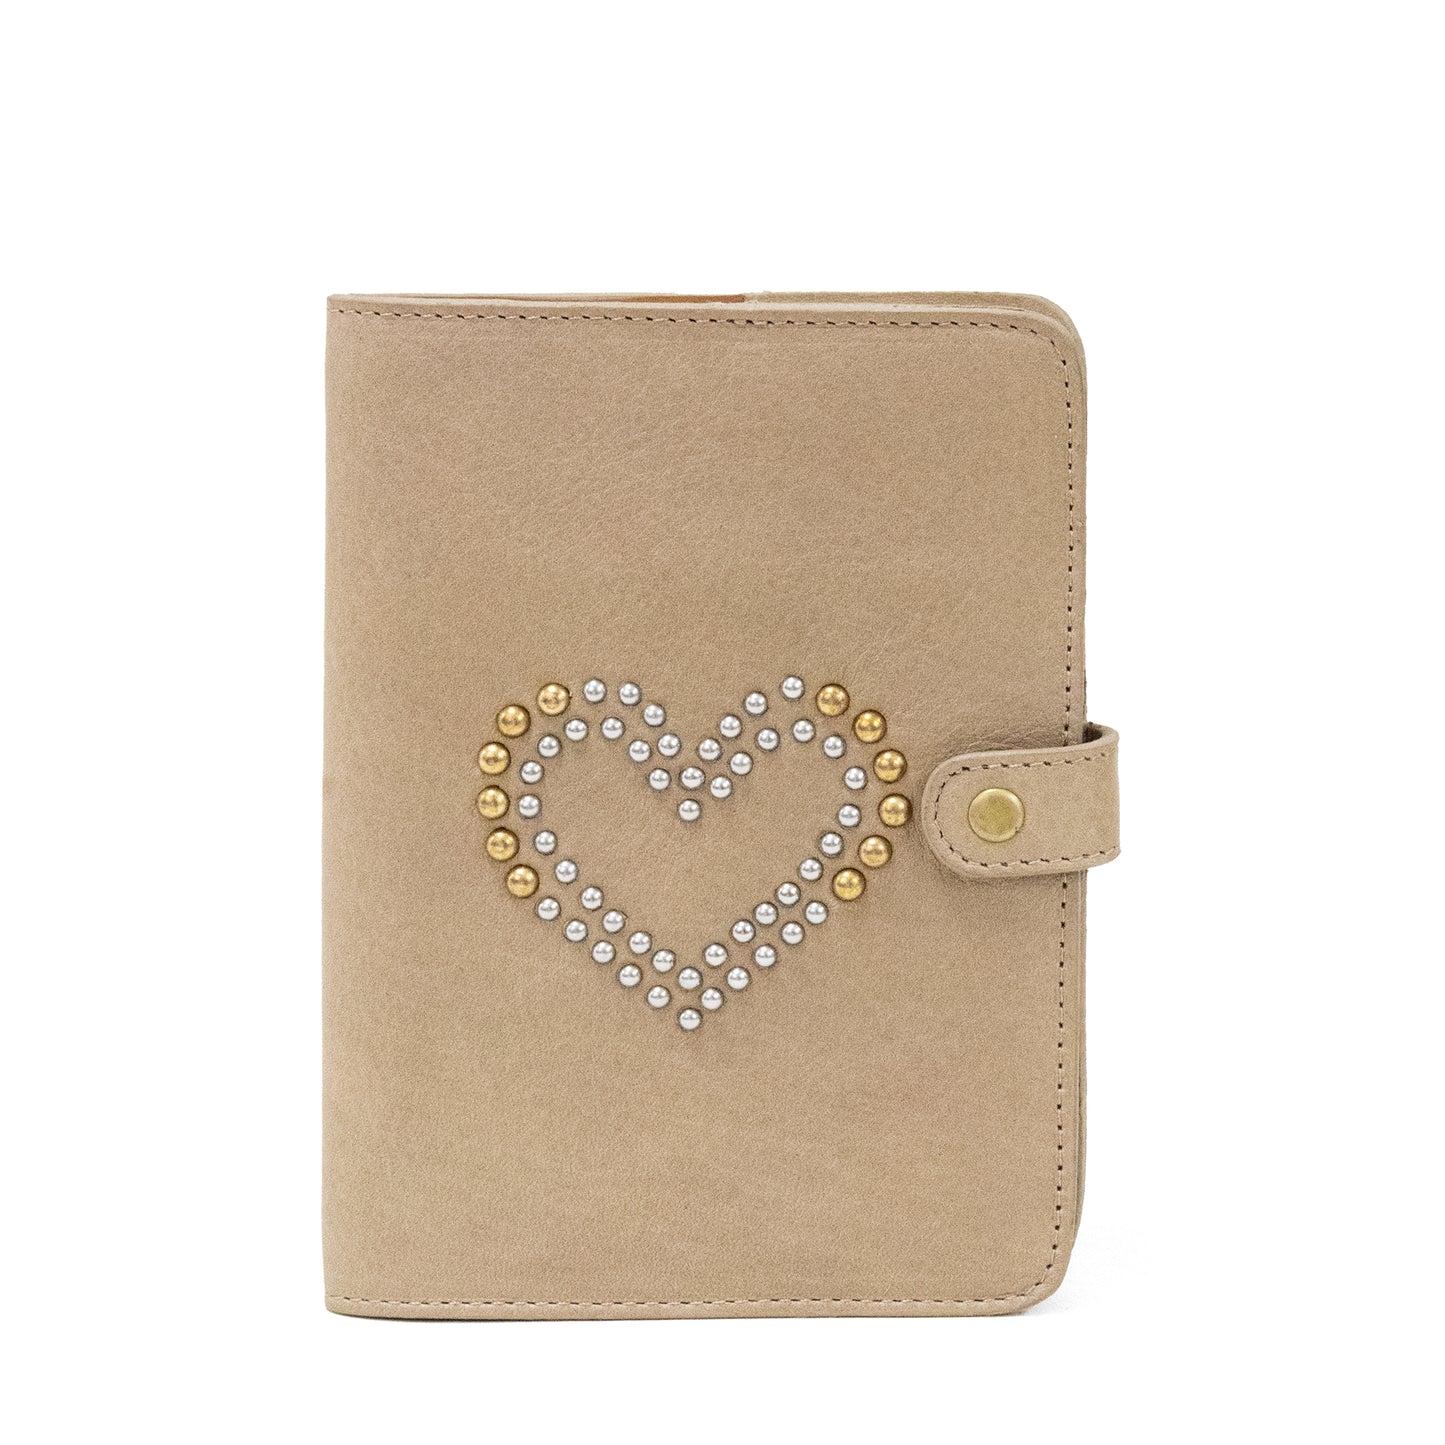 Corazon Notebook 4 1/2" w x 6 h "